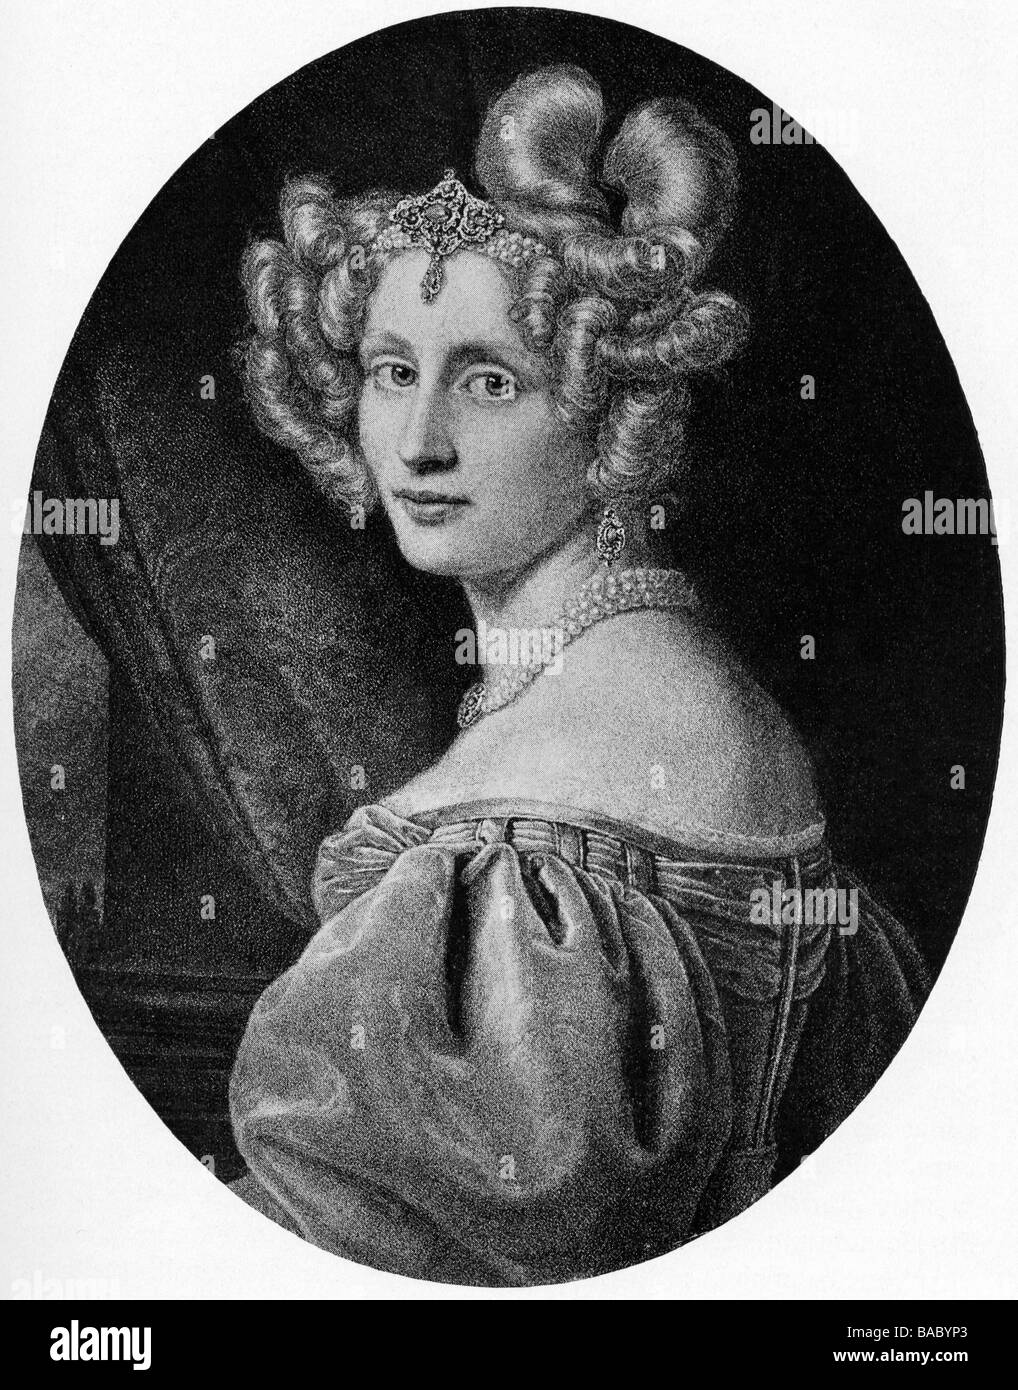 Thurn und Taxis, Wilhelmine Princess of, 3.6.1803 - 14.5.1835, portrait, after contemporary lithograph, 19th century, Stock Photo